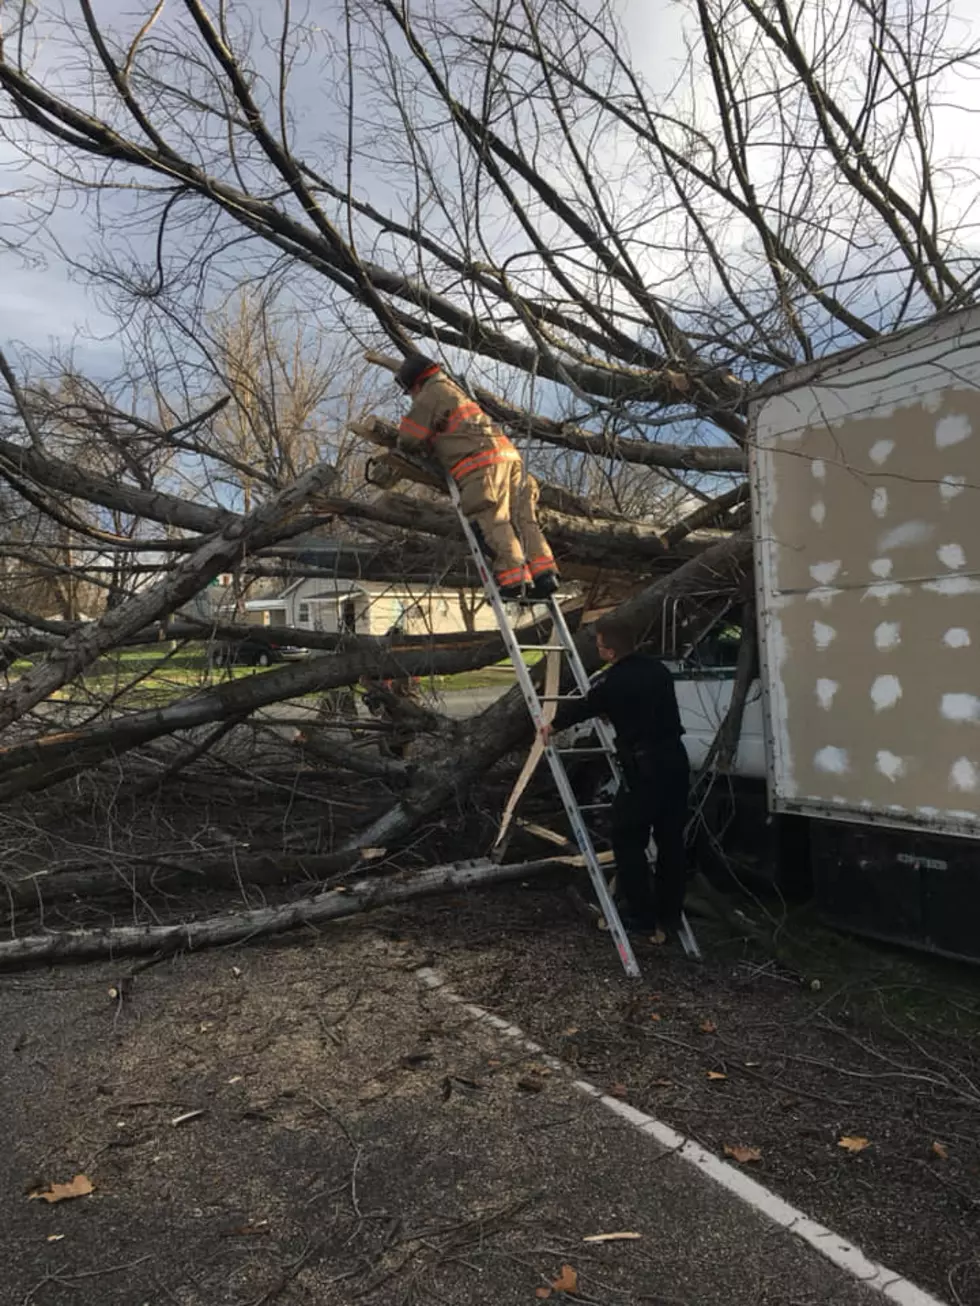 Winds Rip Through The Tri-Cities and The Pictures Tell The Story [PHOTO]